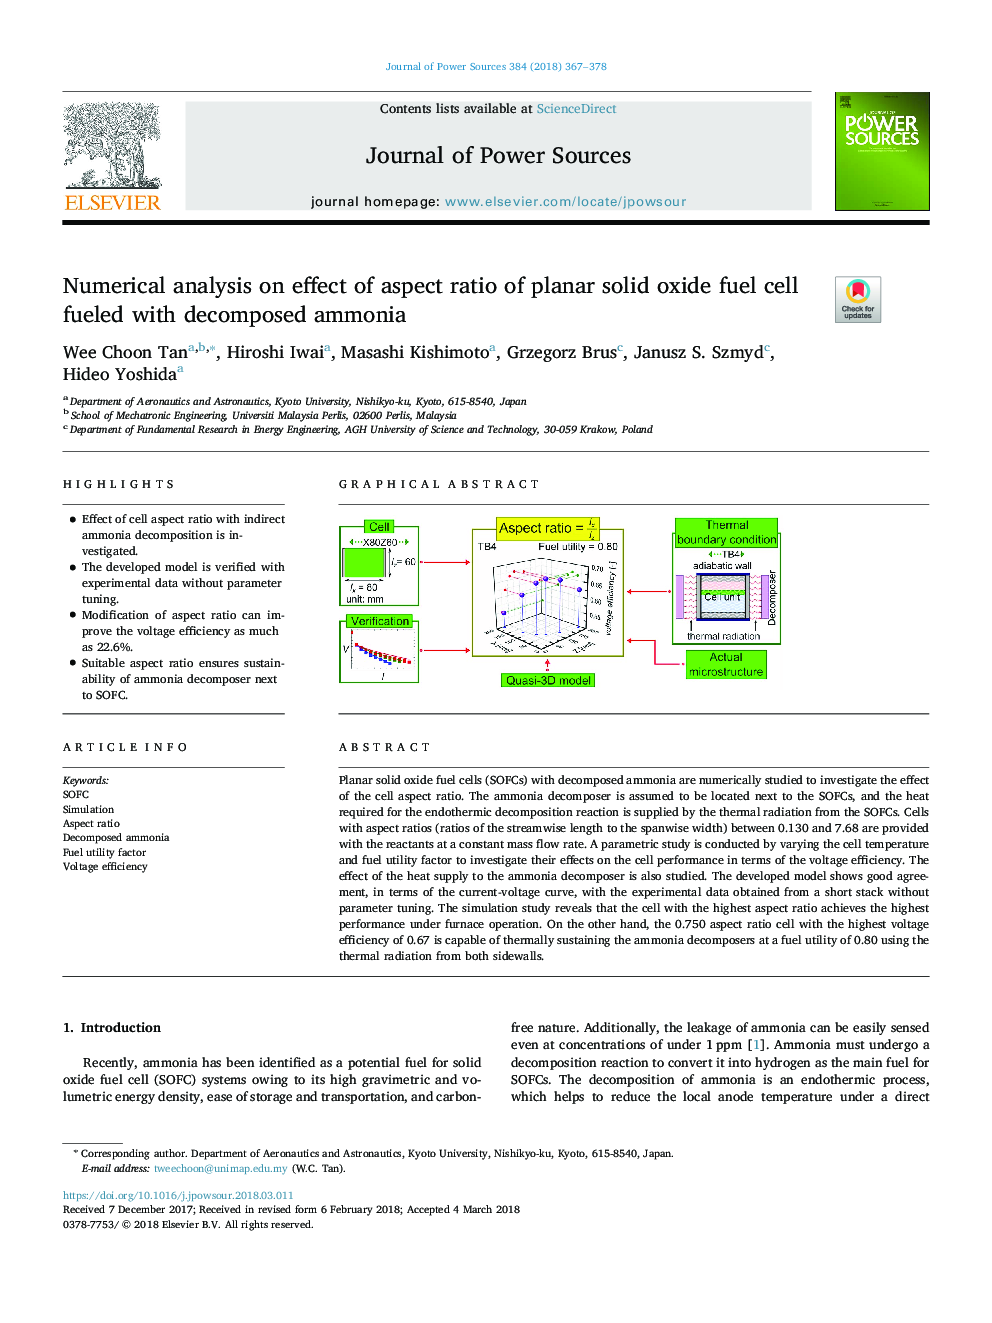 Numerical analysis on effect of aspect ratio of planar solid oxide fuel cell fueled with decomposed ammonia